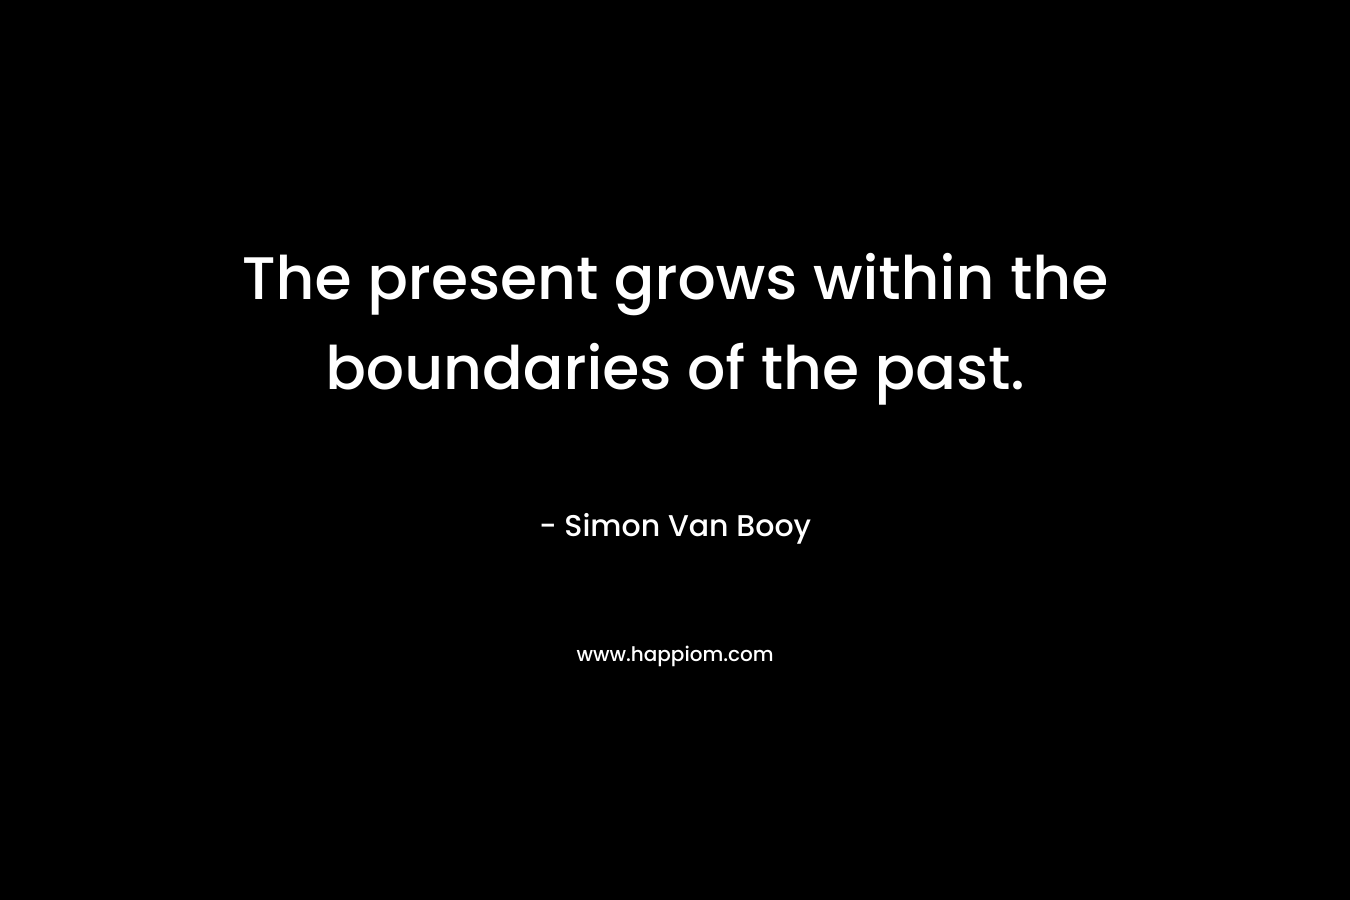 The present grows within the boundaries of the past.